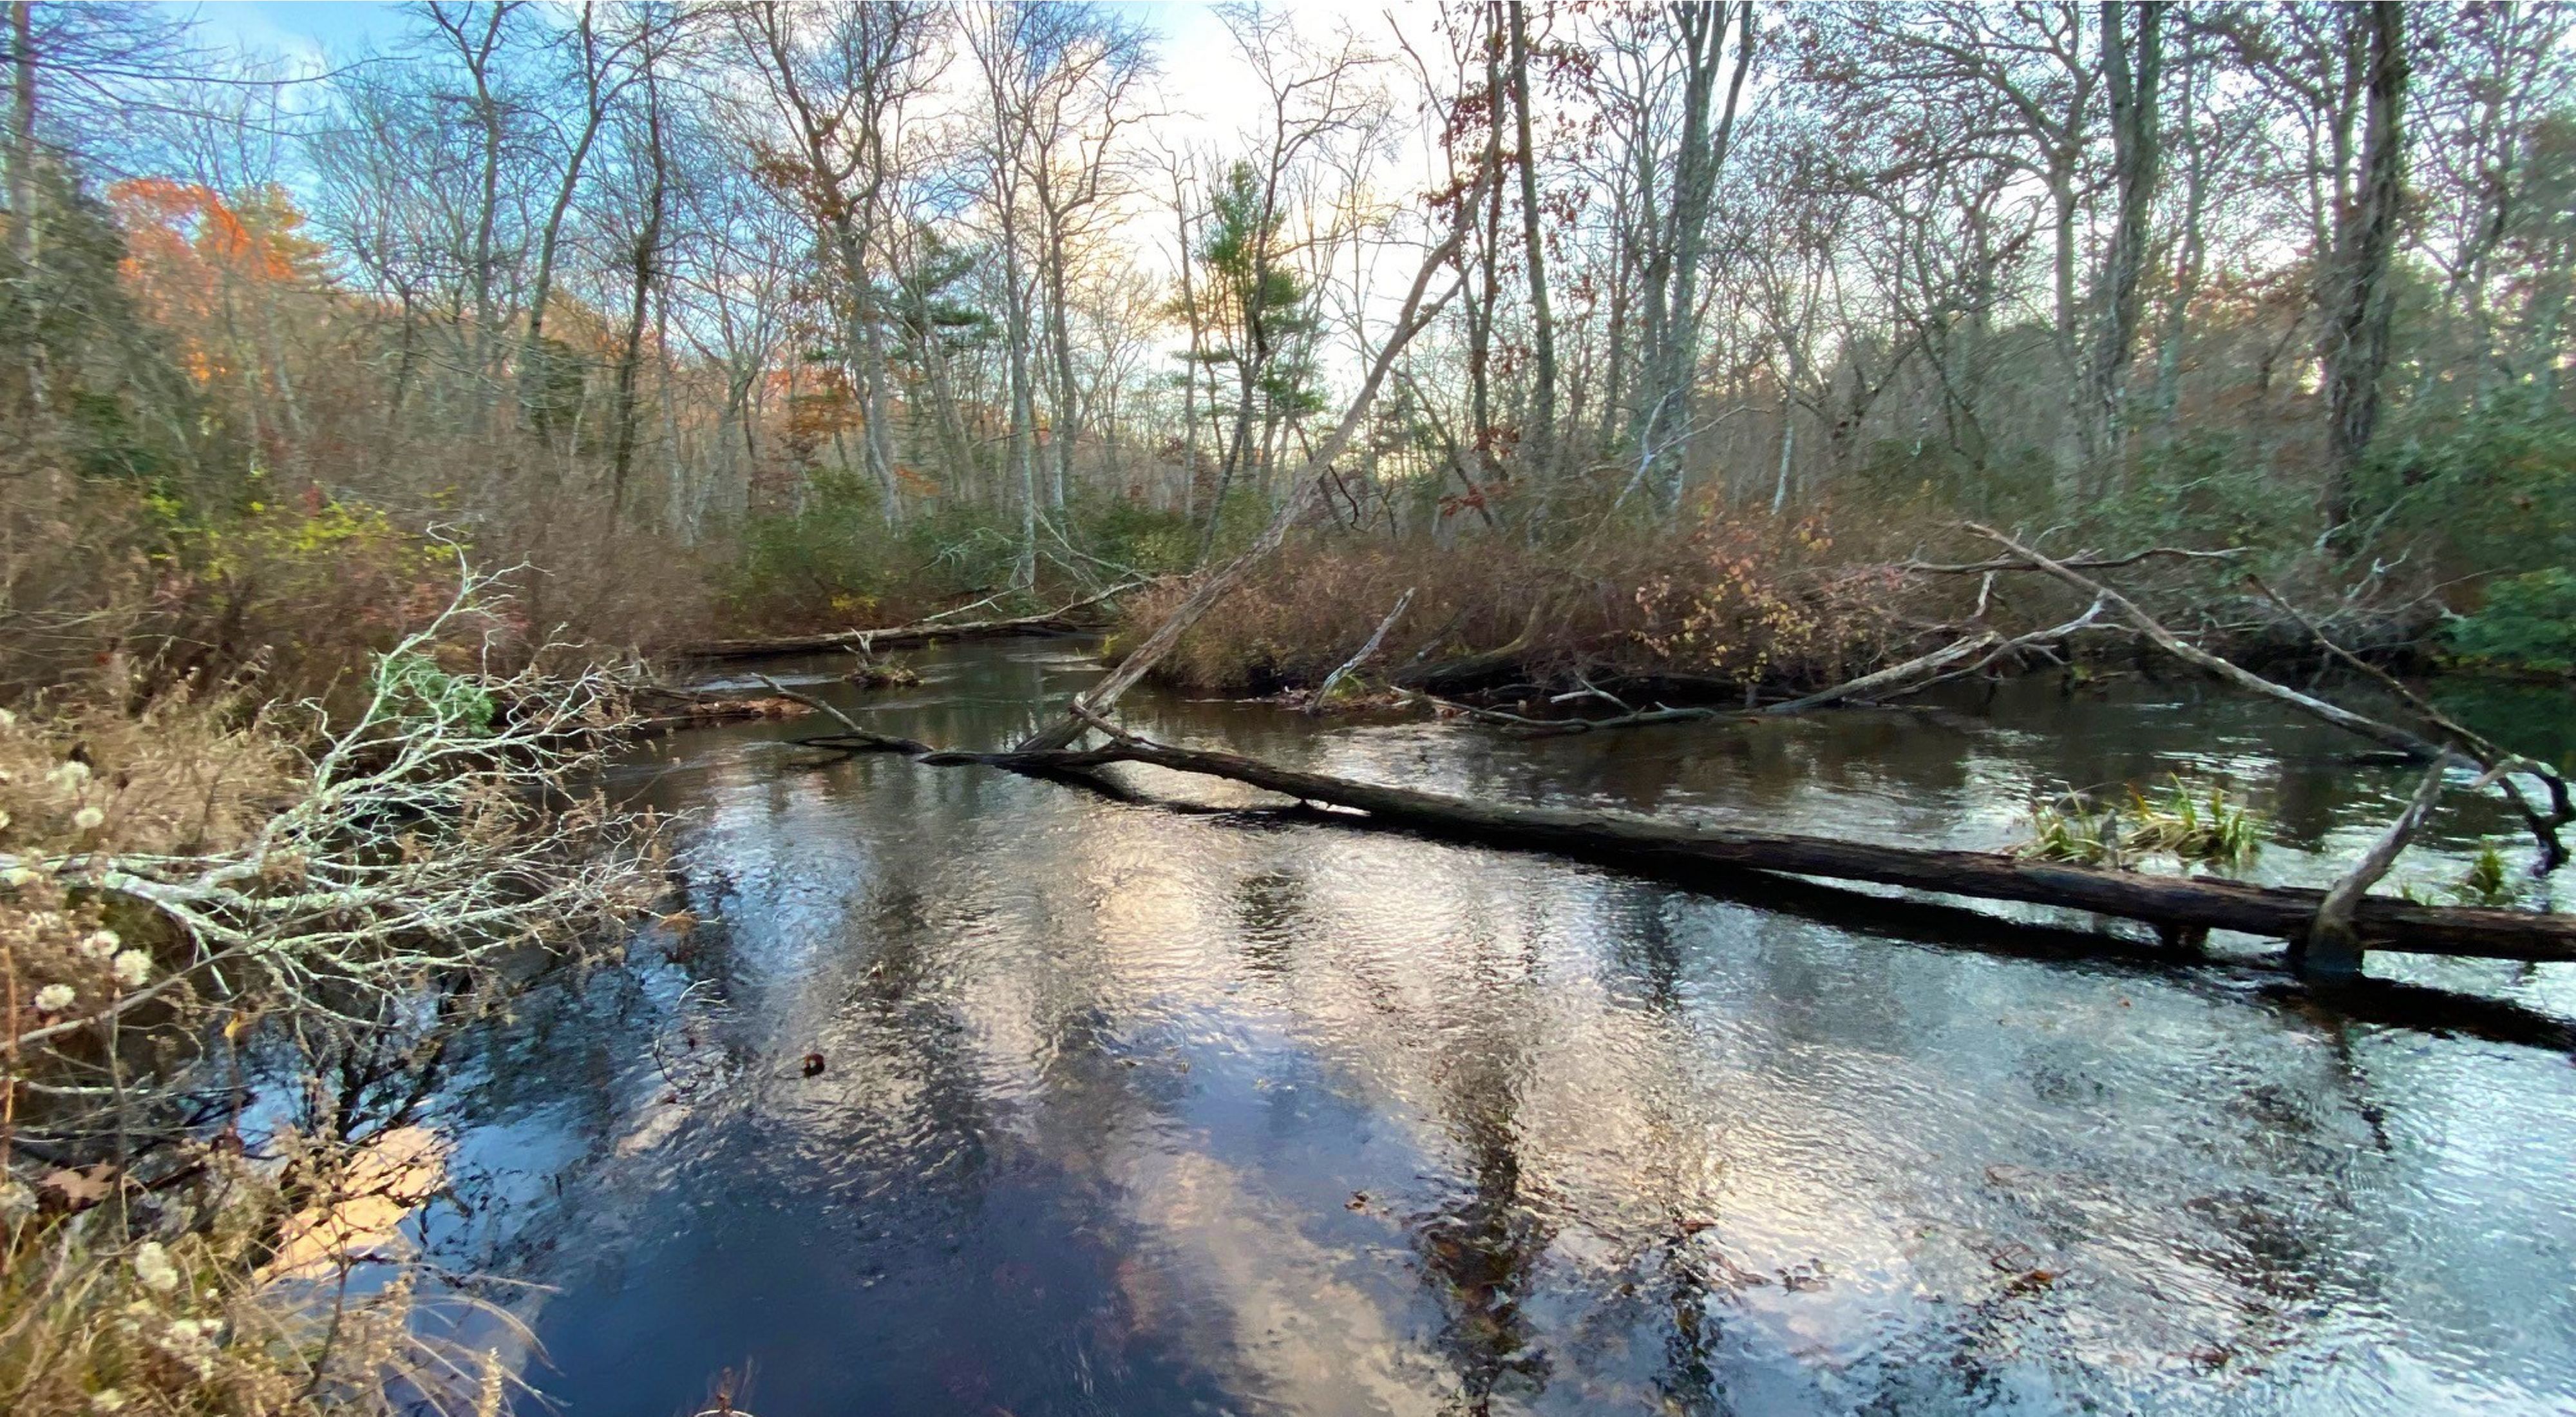 A small river winds through open woodlands, reflecting the white clouds and blue sky above.